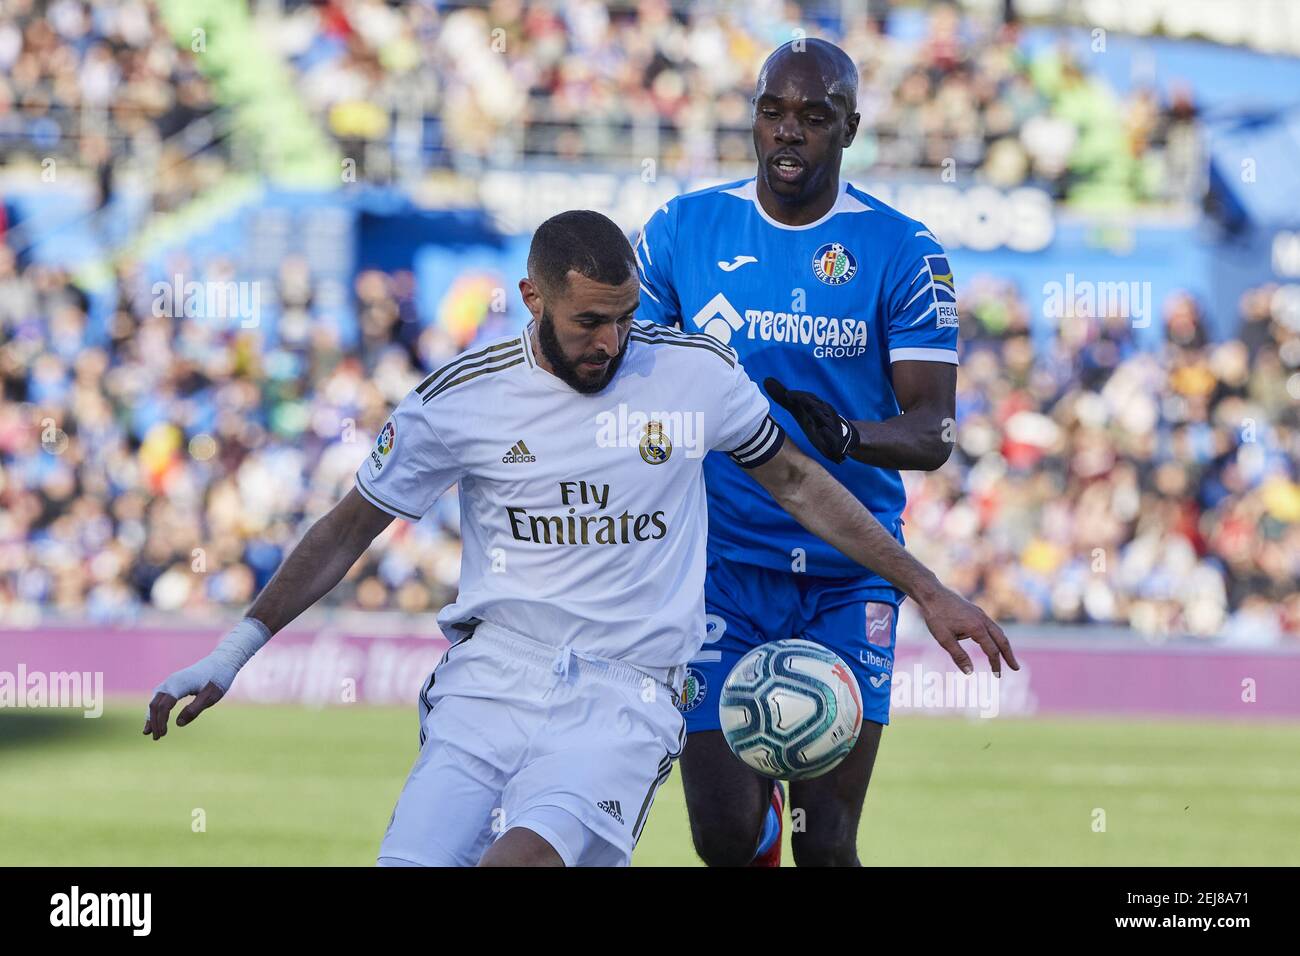 Karim Benzema of Real Madrid and Allan-Romeo Nyom of Getafe FC are seen in  action during the La Liga match between Getafe CF and Real Madrid at  Coliseum Alfonso Perez in Getafe. (